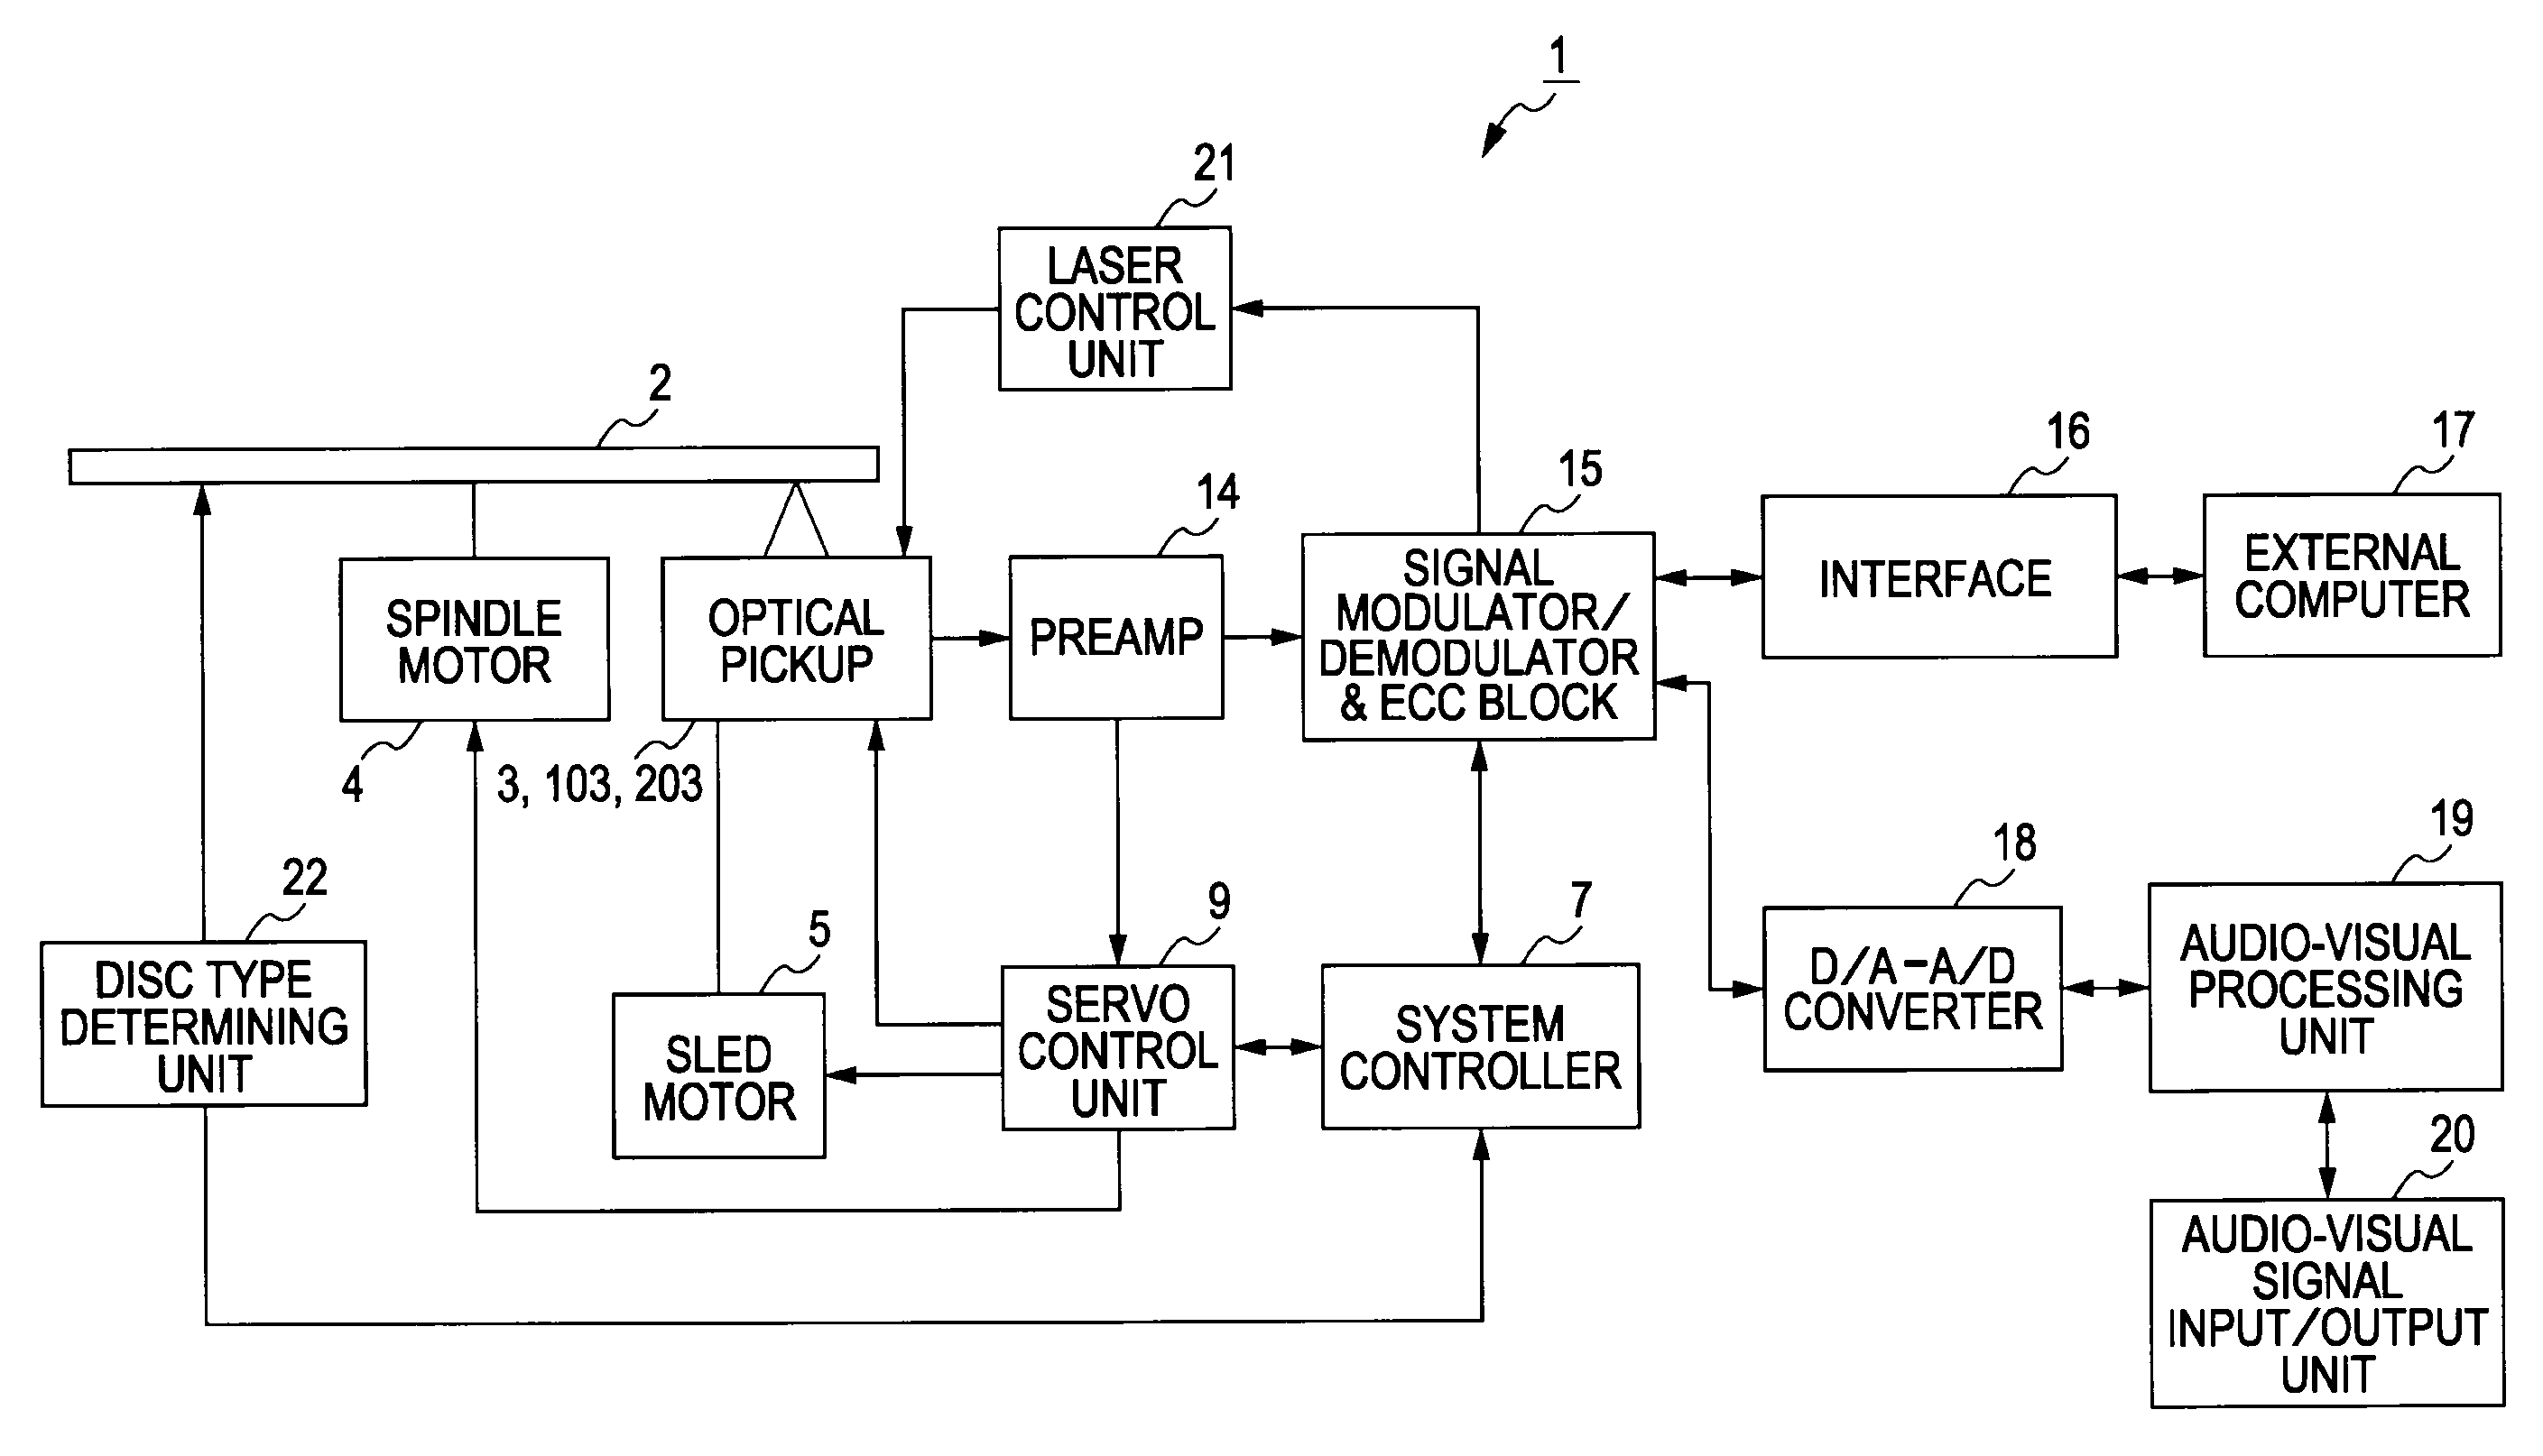 Object lens, optical pickup, and optical disc device